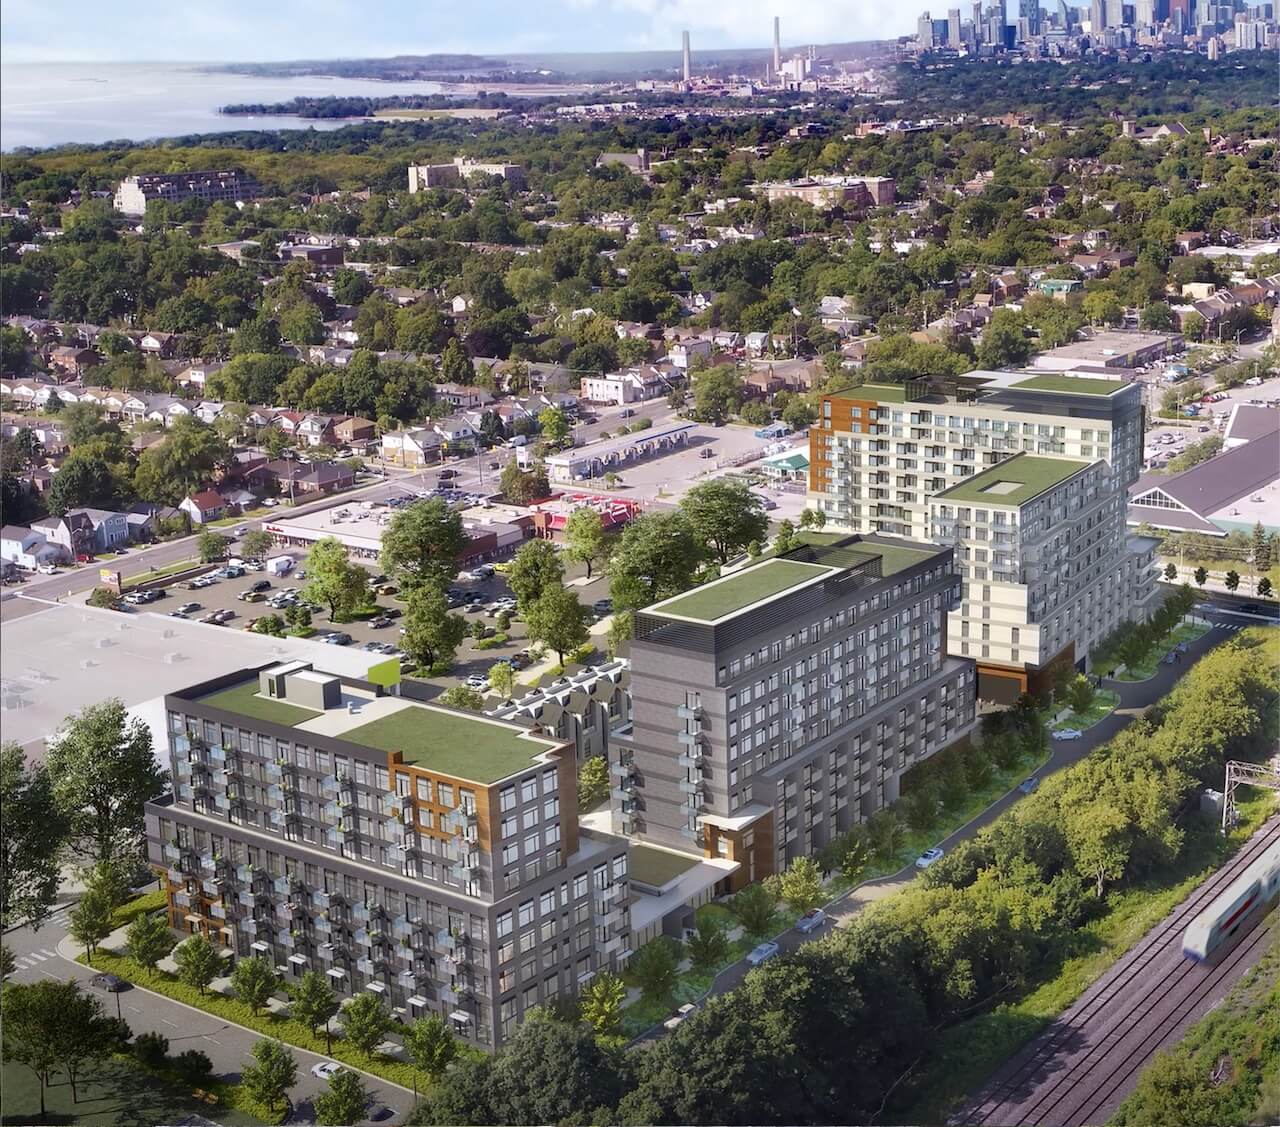 Rendering of Birchley Park Condos and Towns aerial